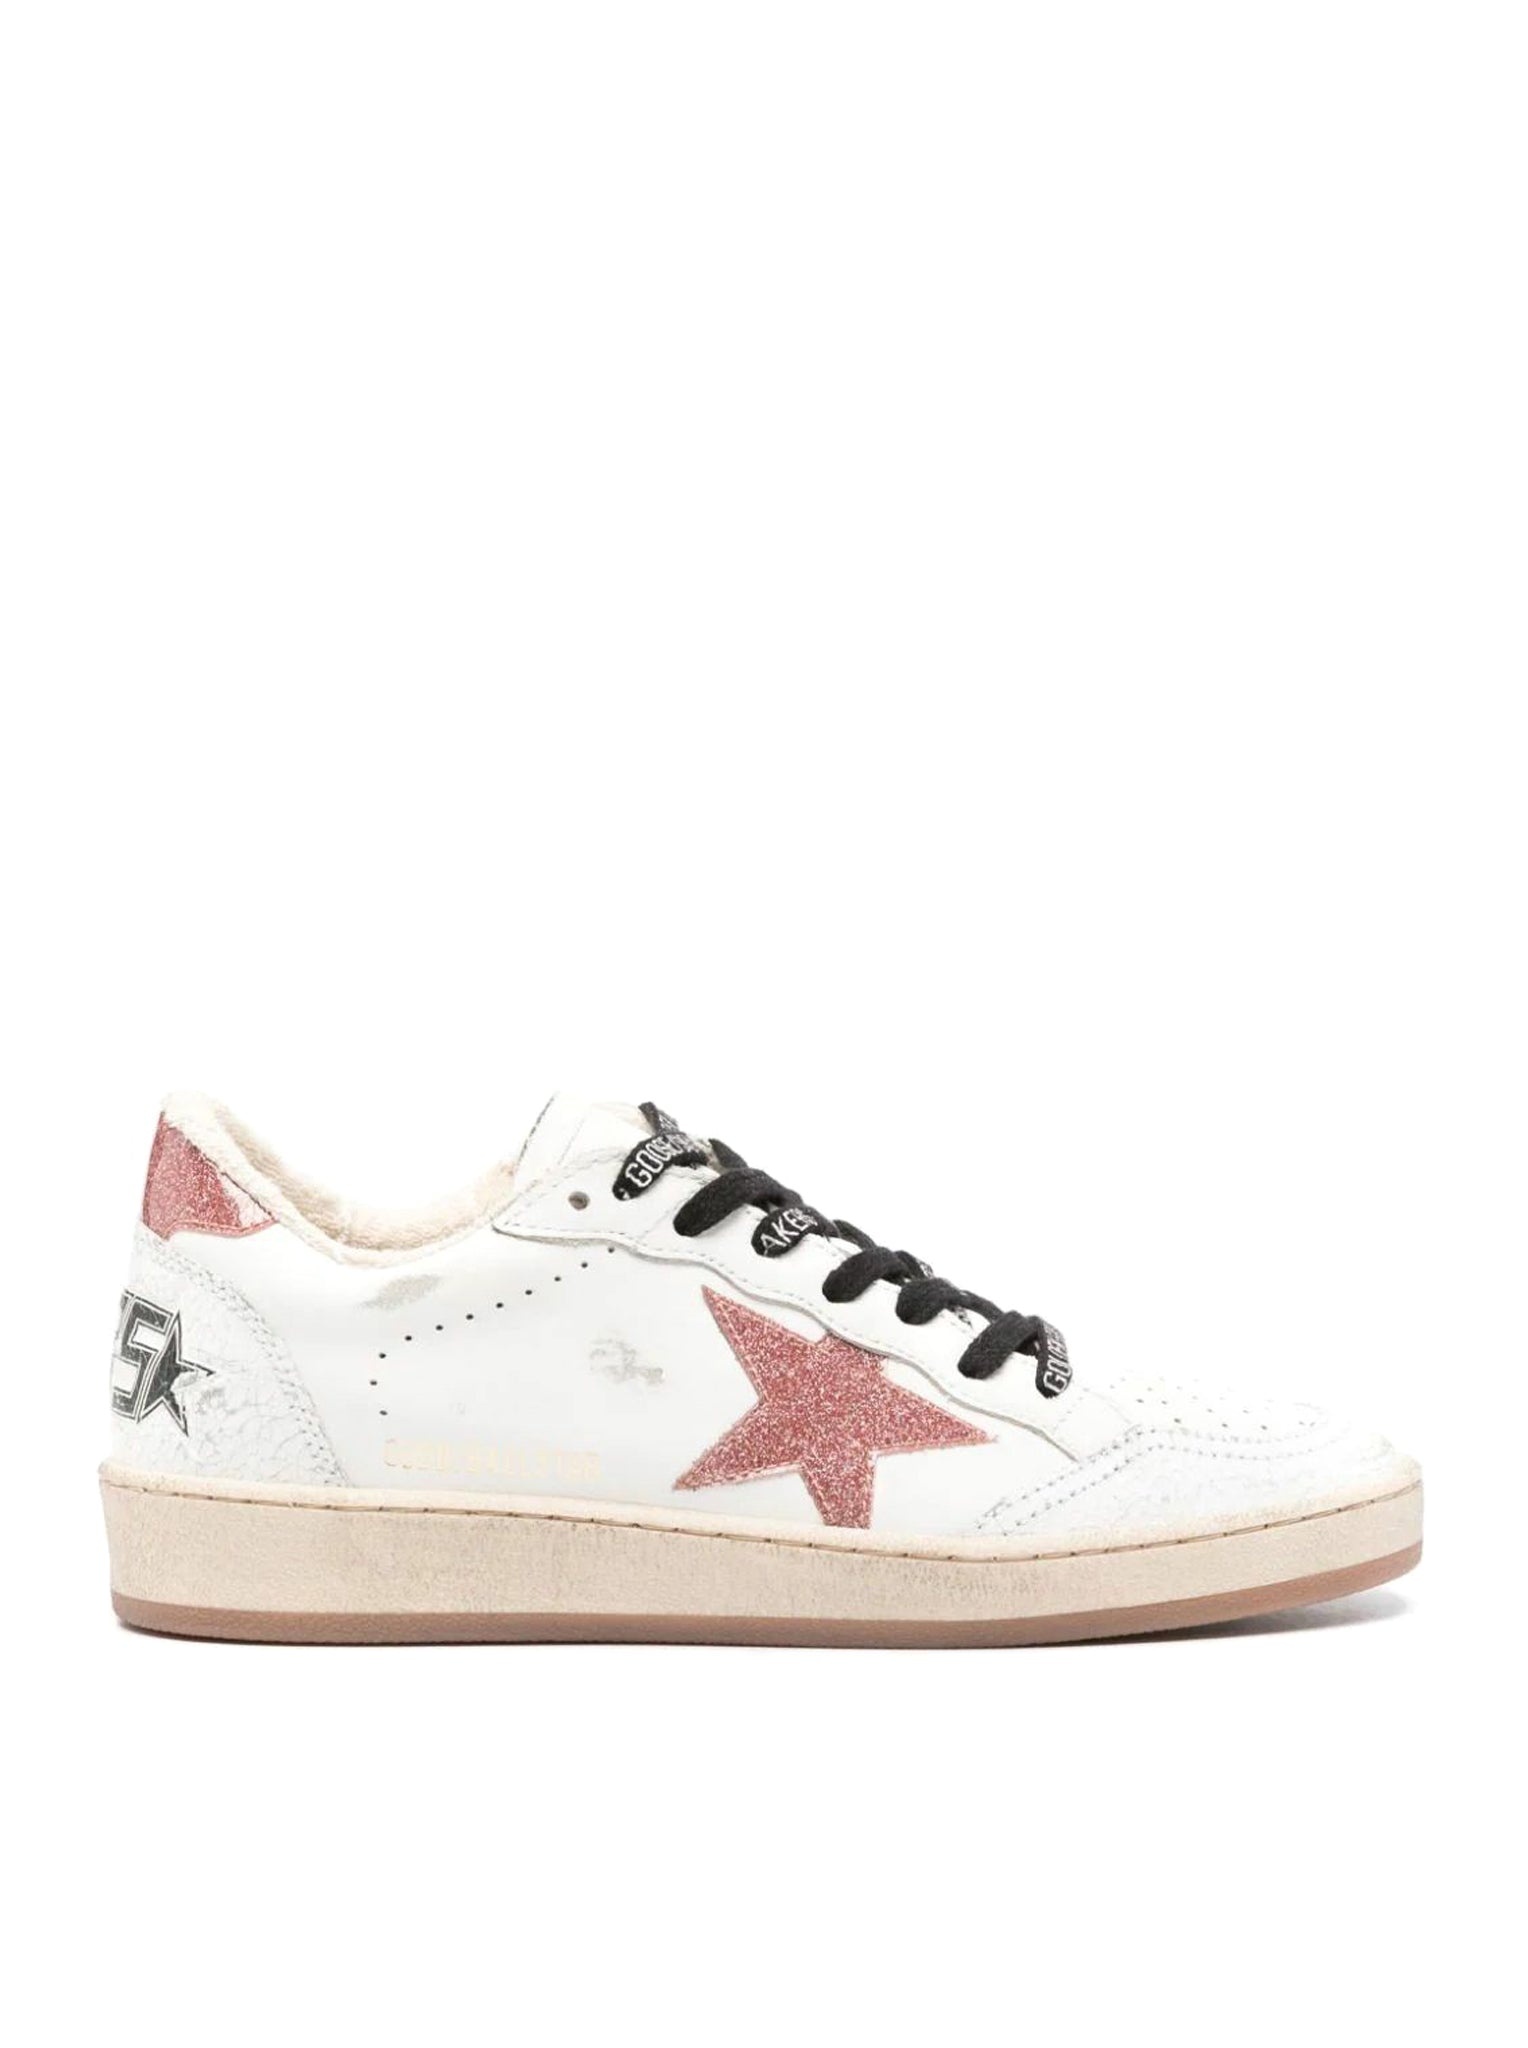 BALL-STAR LEATHER SNEAKERS - 1